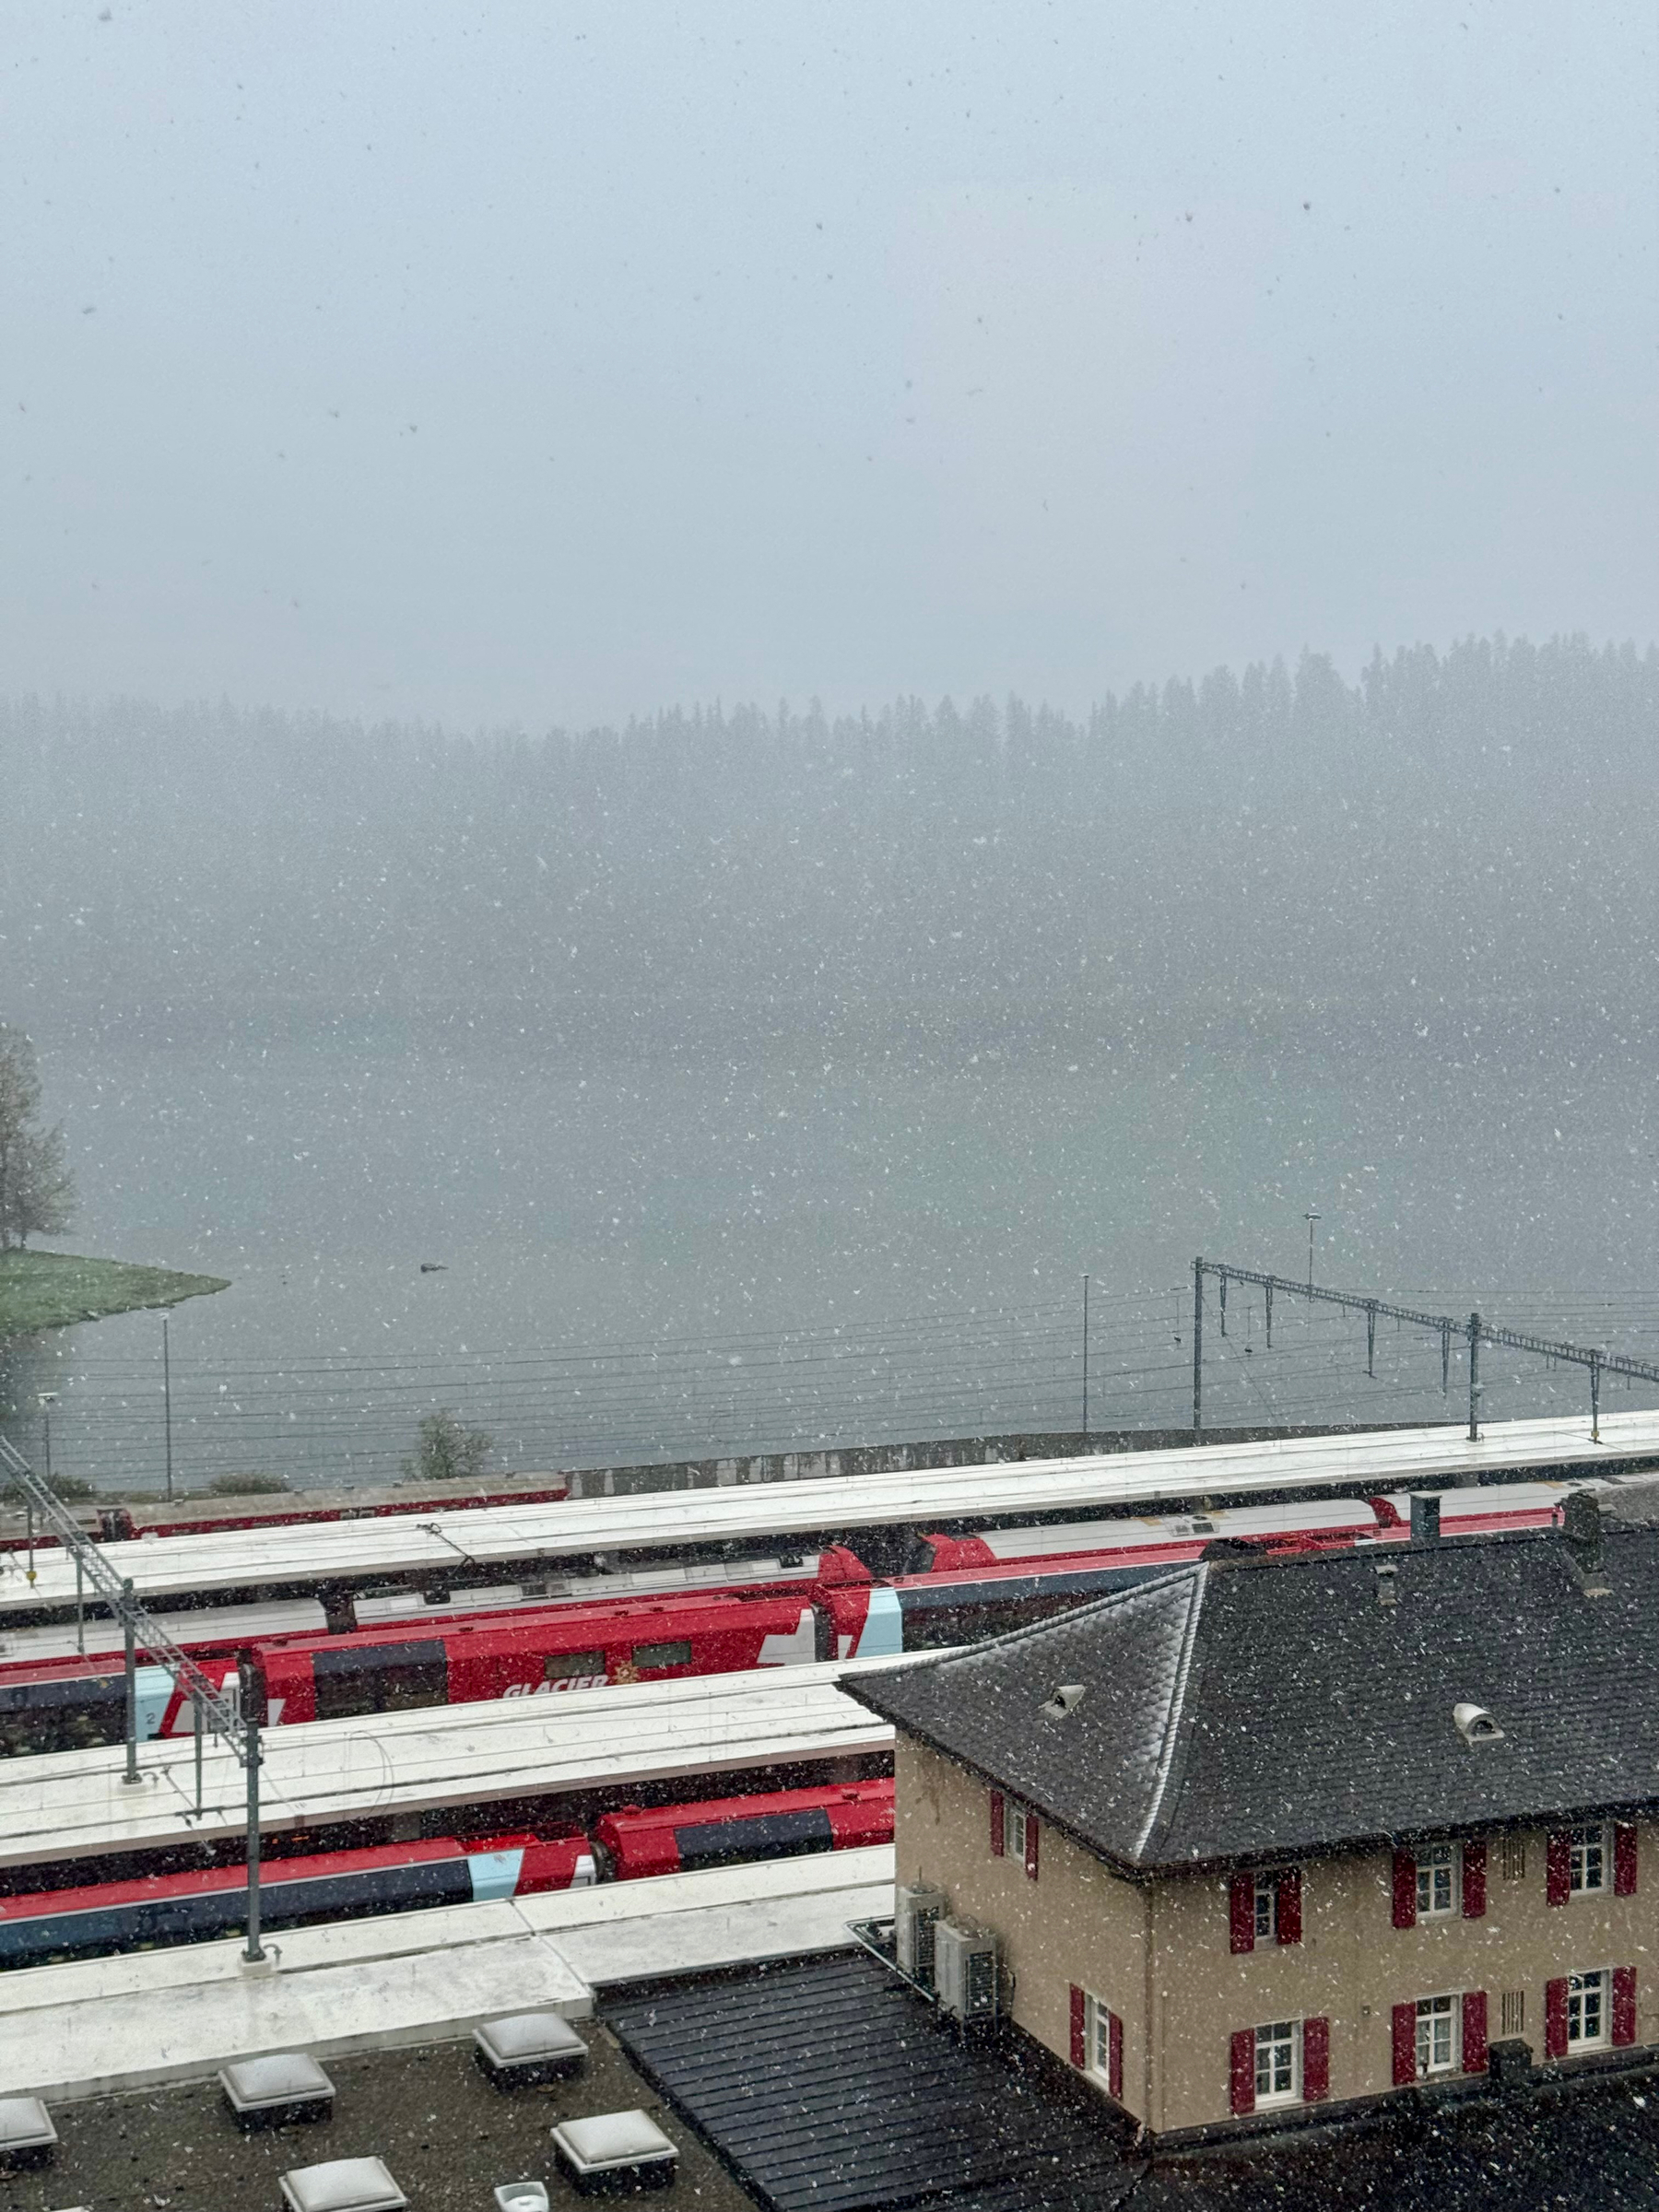 Snow falling over a train station with red trains and a building in the foreground. Trees and a lake are visible in the misty background.